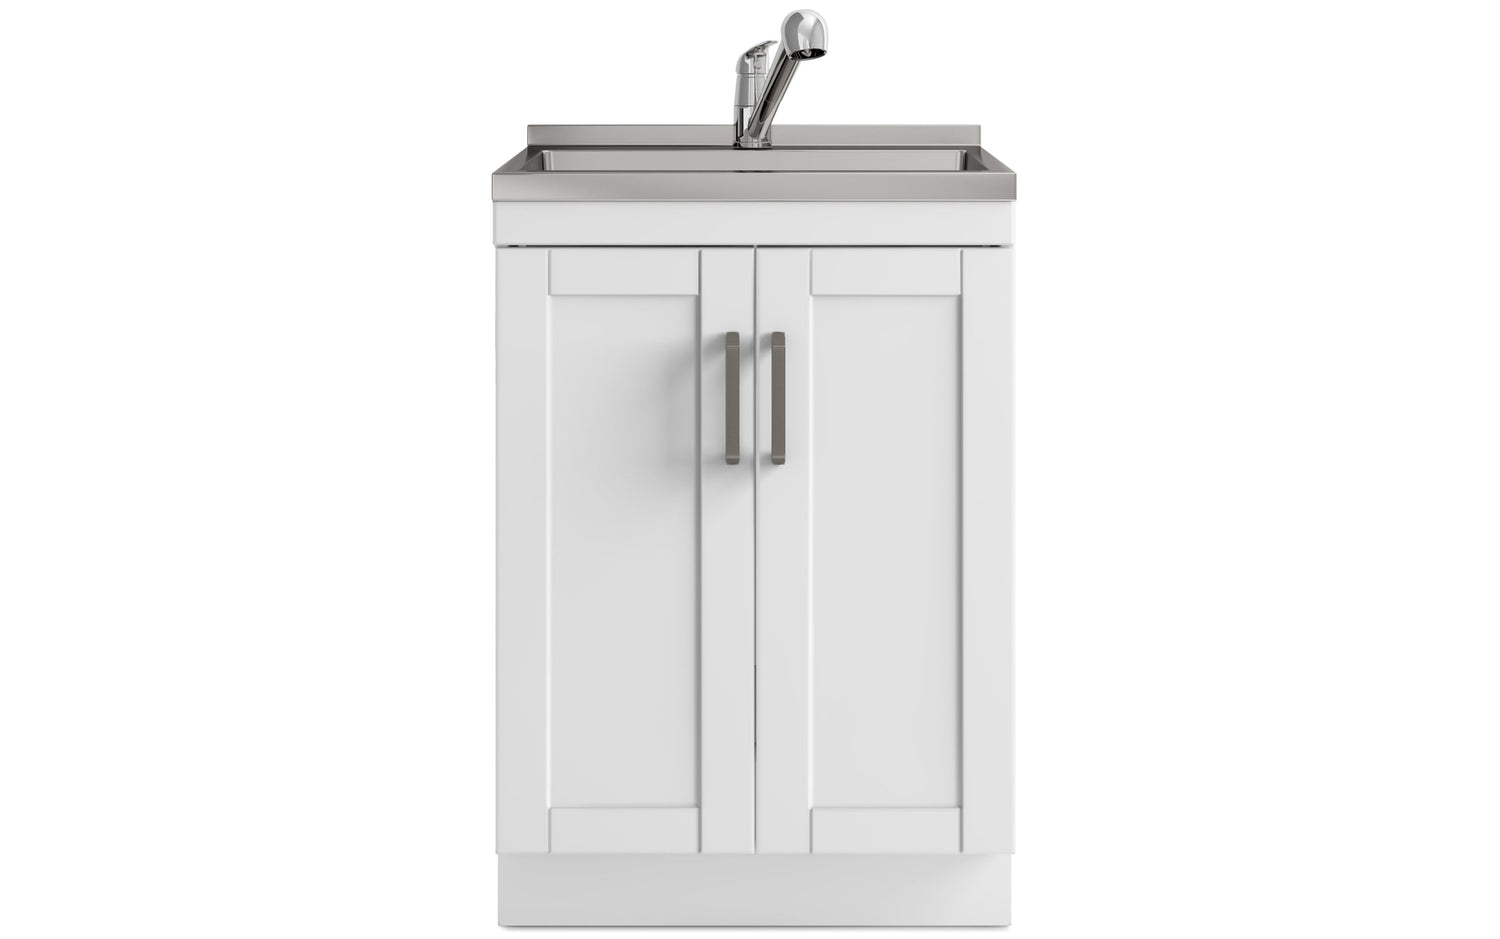 Kyle 24 inch Laundry Cabinet with Faucet and Stainless Steel Sink